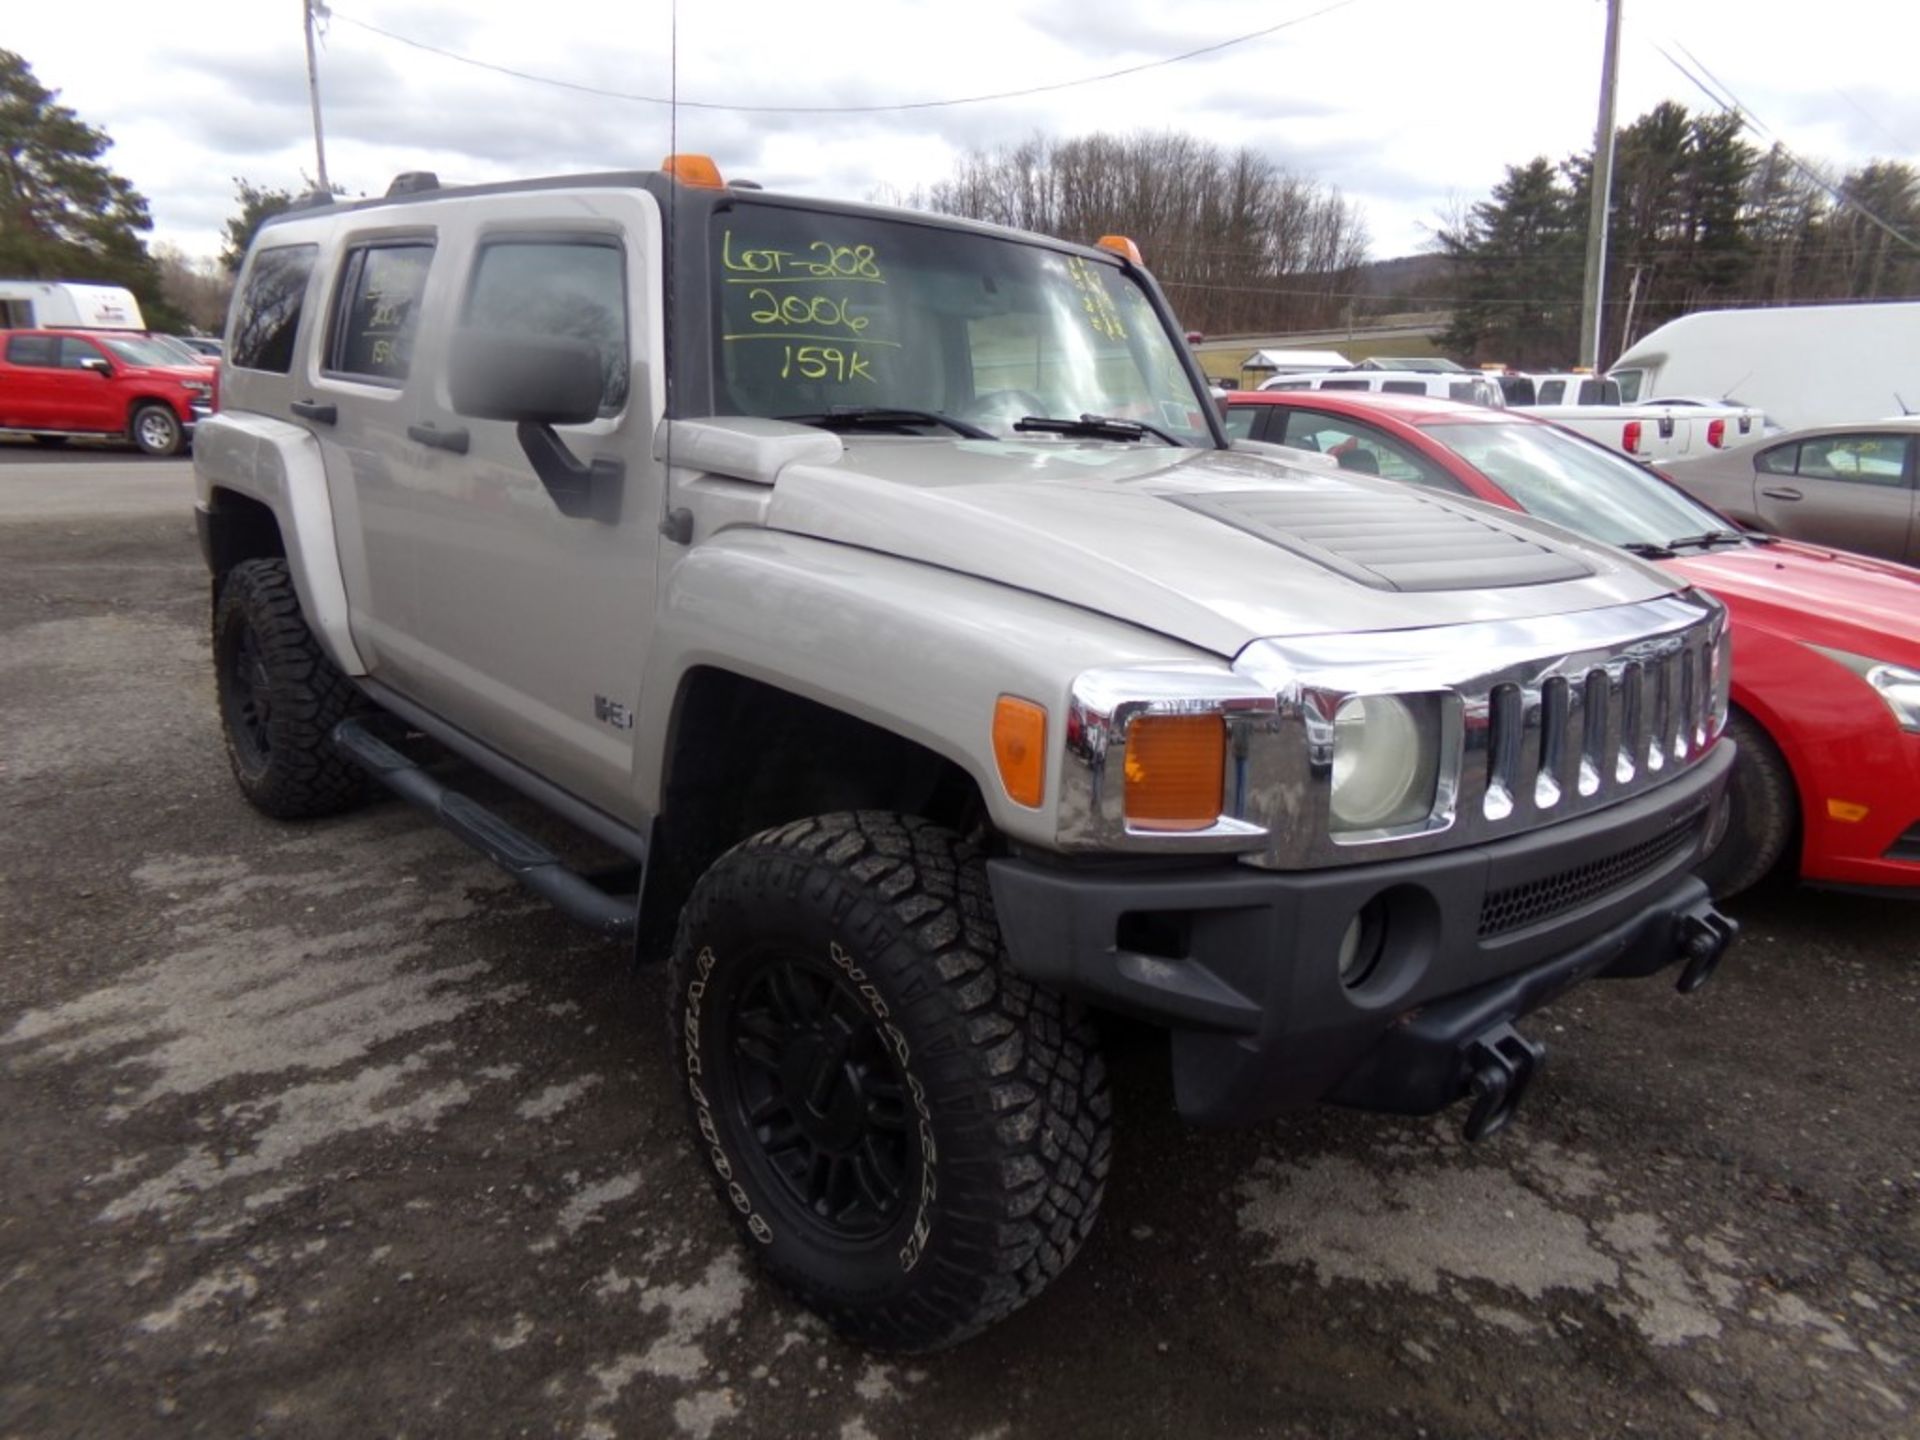 2006 Hummer H3, Sunroof,Gray, 159,522 Miles, VIN#: 5GTDN136768171999 - Remote Auto Start,New - Image 4 of 11